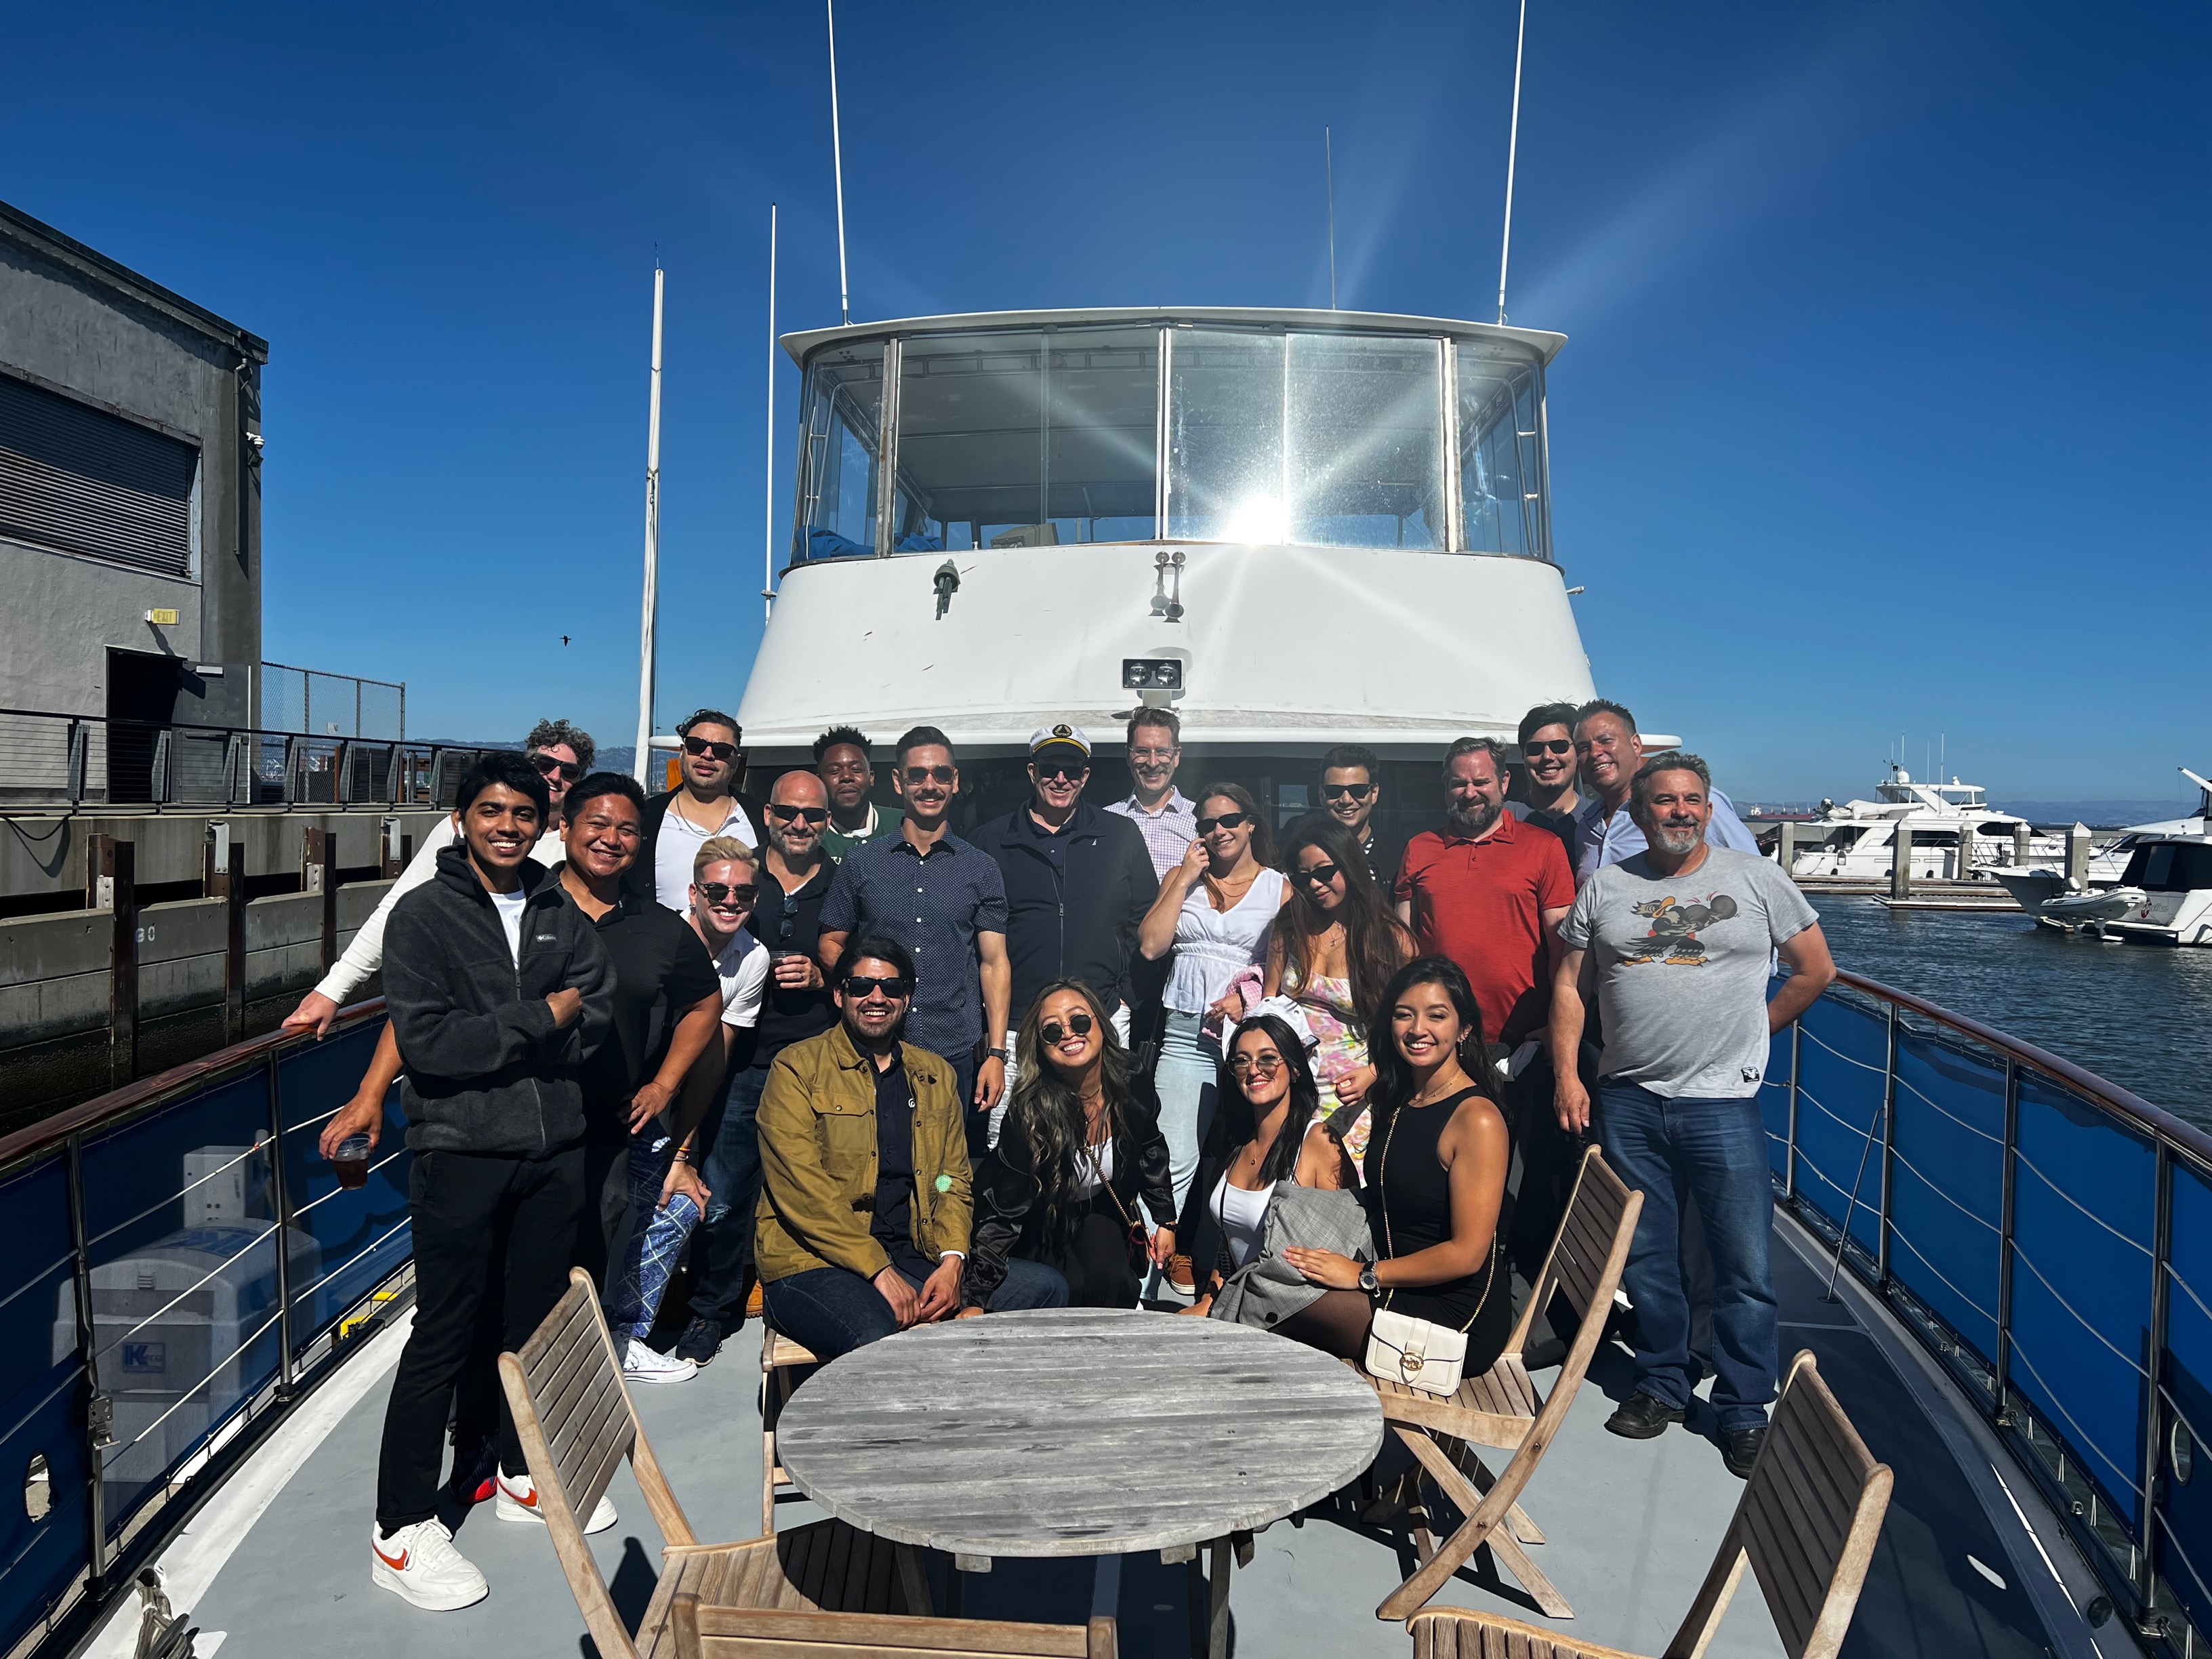 Members of Leyton's team posing for a group photo on a boat.